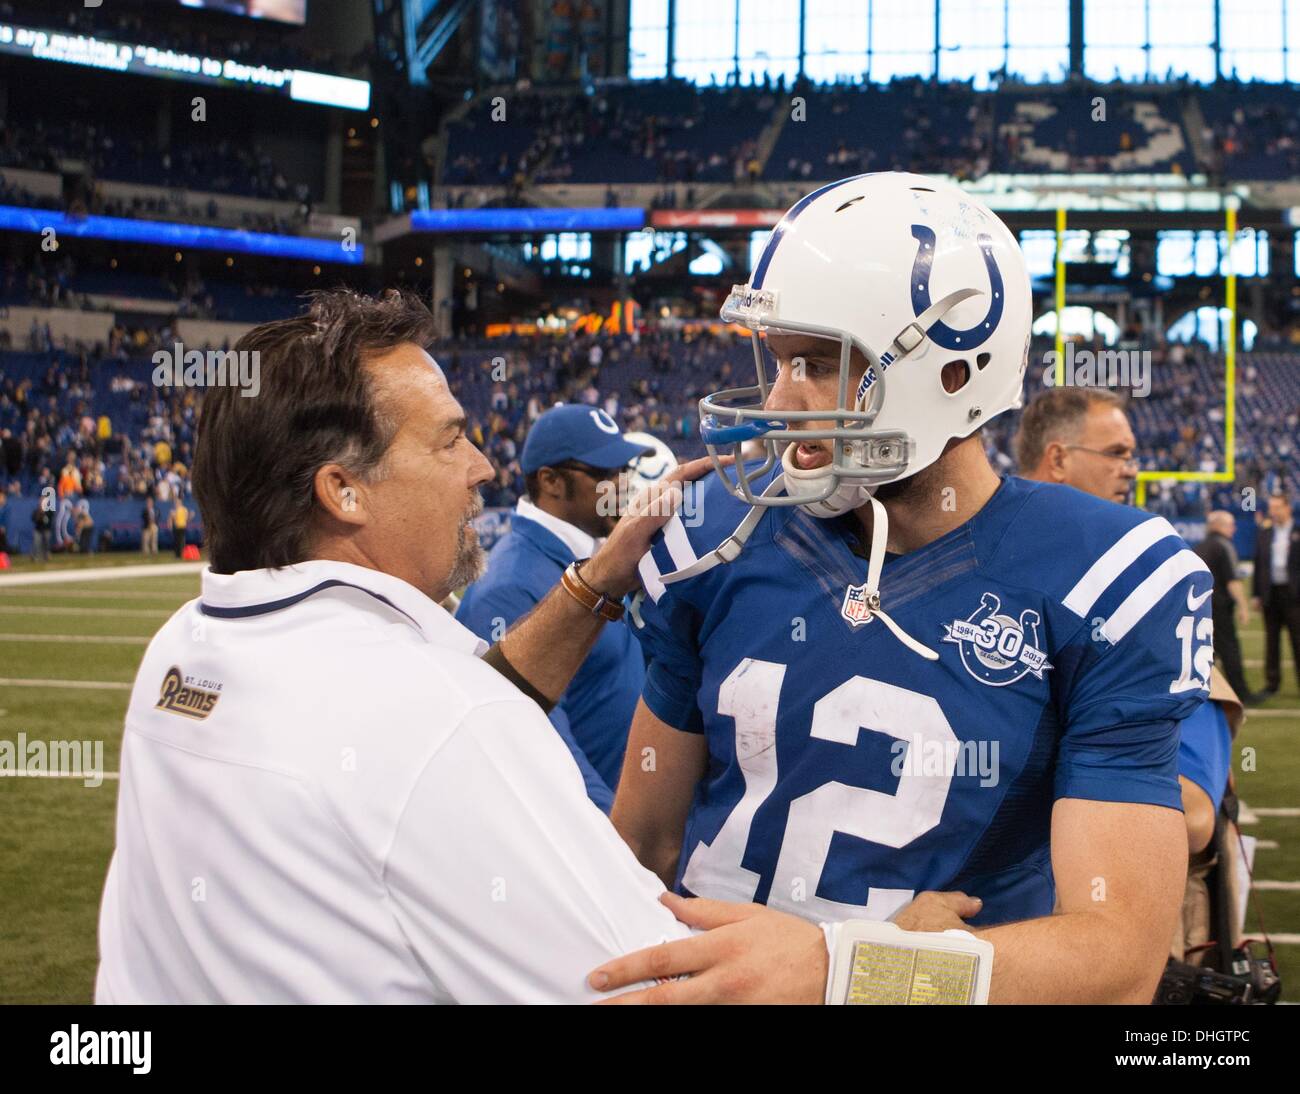 Oct. 10, 2013 - Indianapolis, OH, United States of America - November 10, 2013: Indianapolis Colts quarterback Andrew Luck (12) meets with St. Louis Rams head coach Jeff Fisher at midfield after the NFL game between the St. Louis Rams and the Indianapolis Colts at Lucas Oil Stadium in Indianapolis, IN. The St. Louis Rams defeated the Indianapolis Colts 38-8. Stock Photo